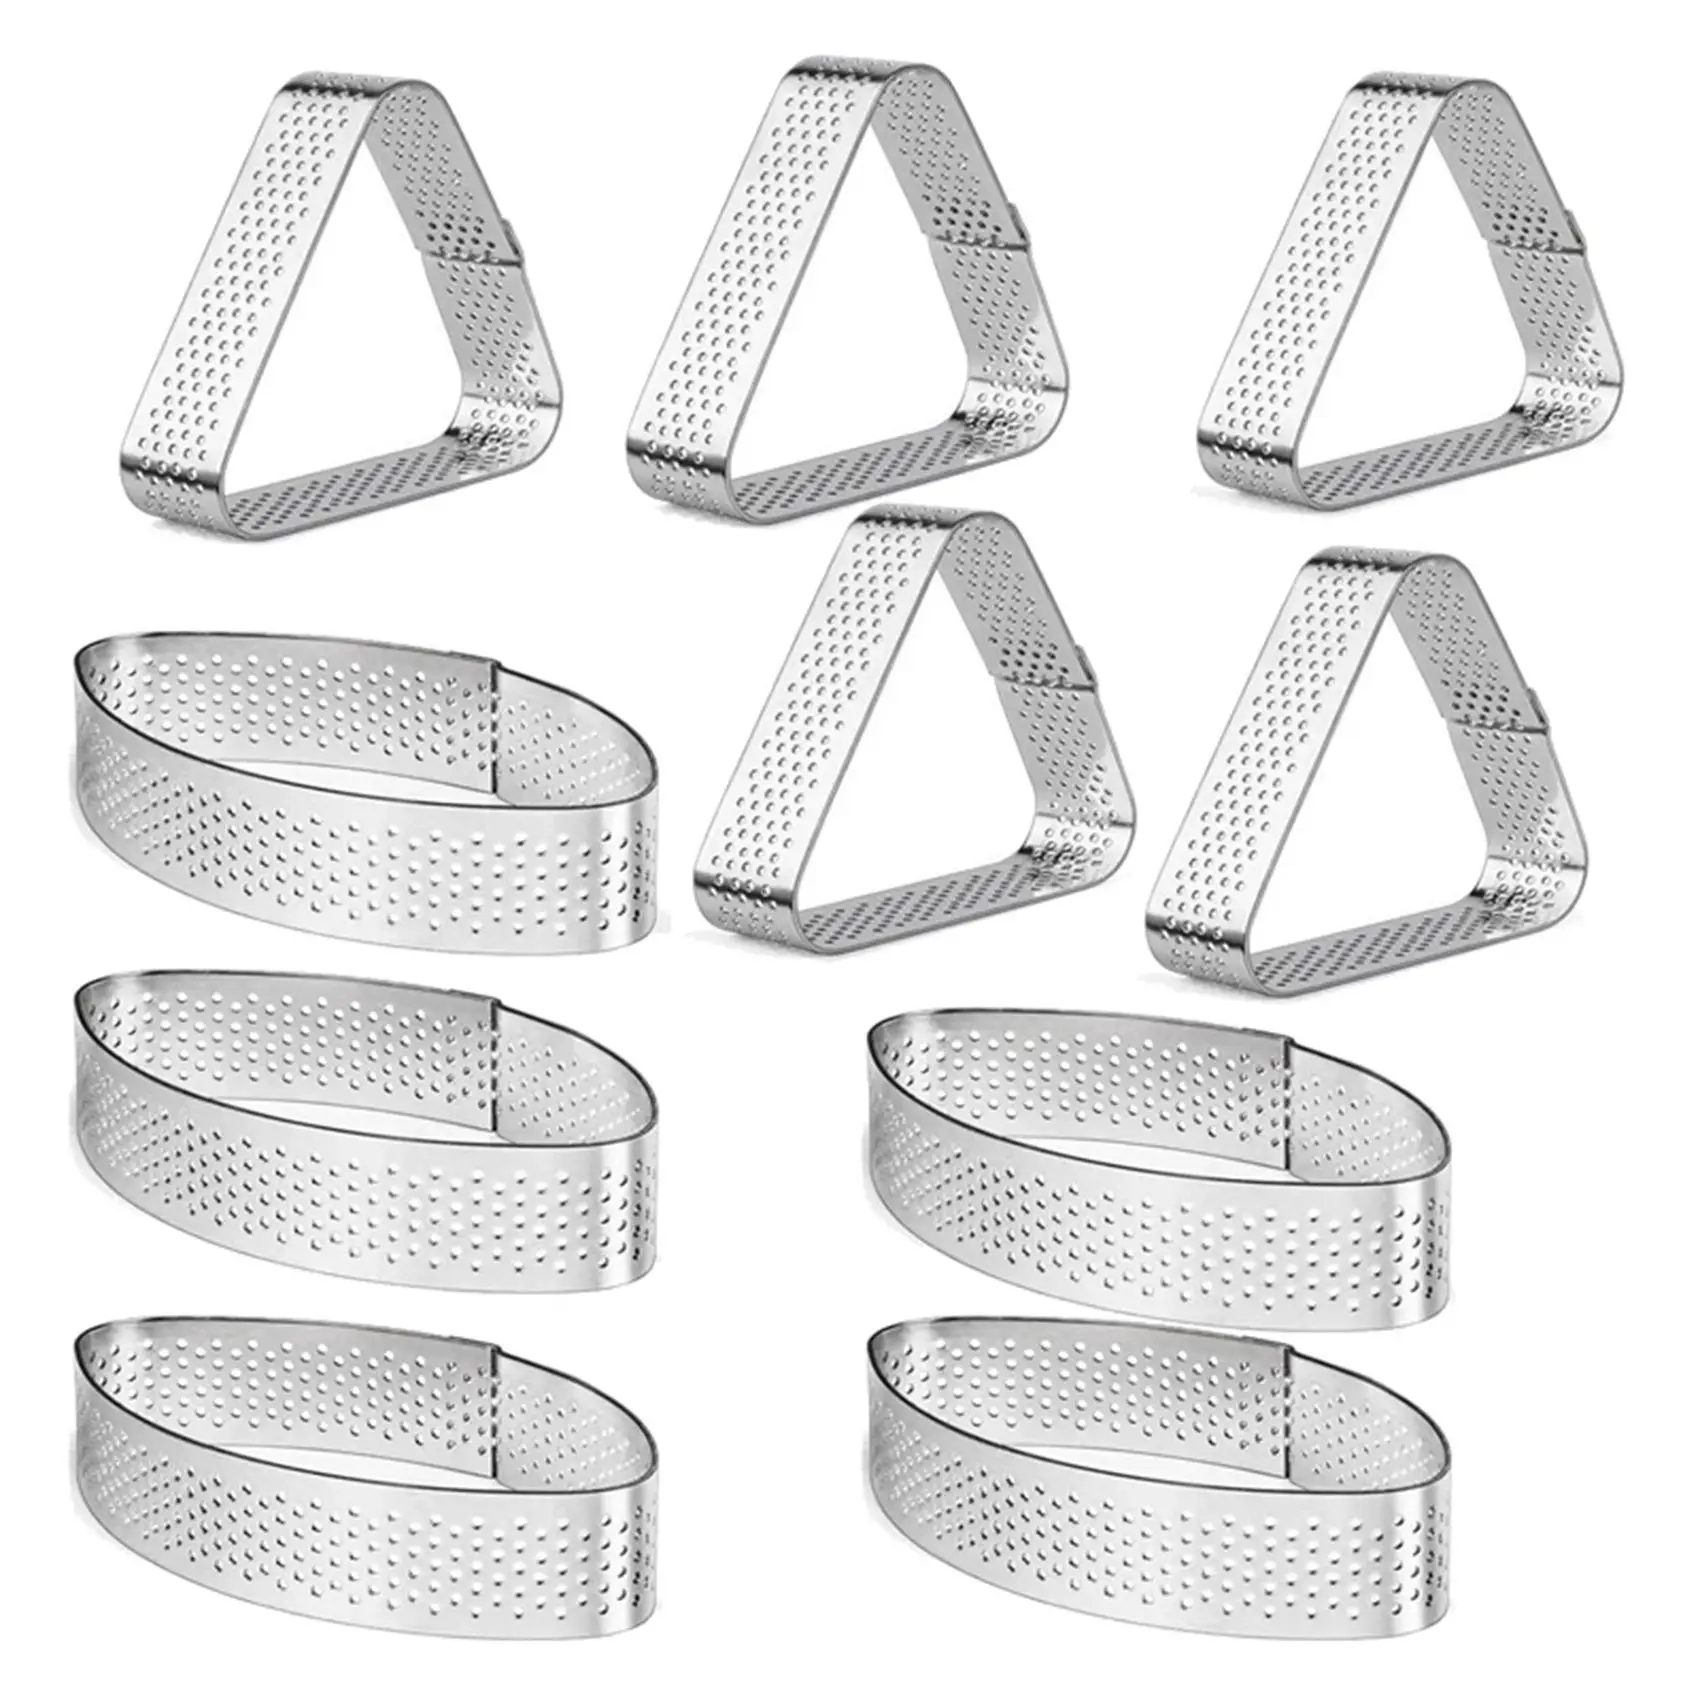 

Boat Shape & Triple-Cornered Stainless Steel Tart Ring Tower Cake Mould Baking Tools Perforated Cake Mousse Ring